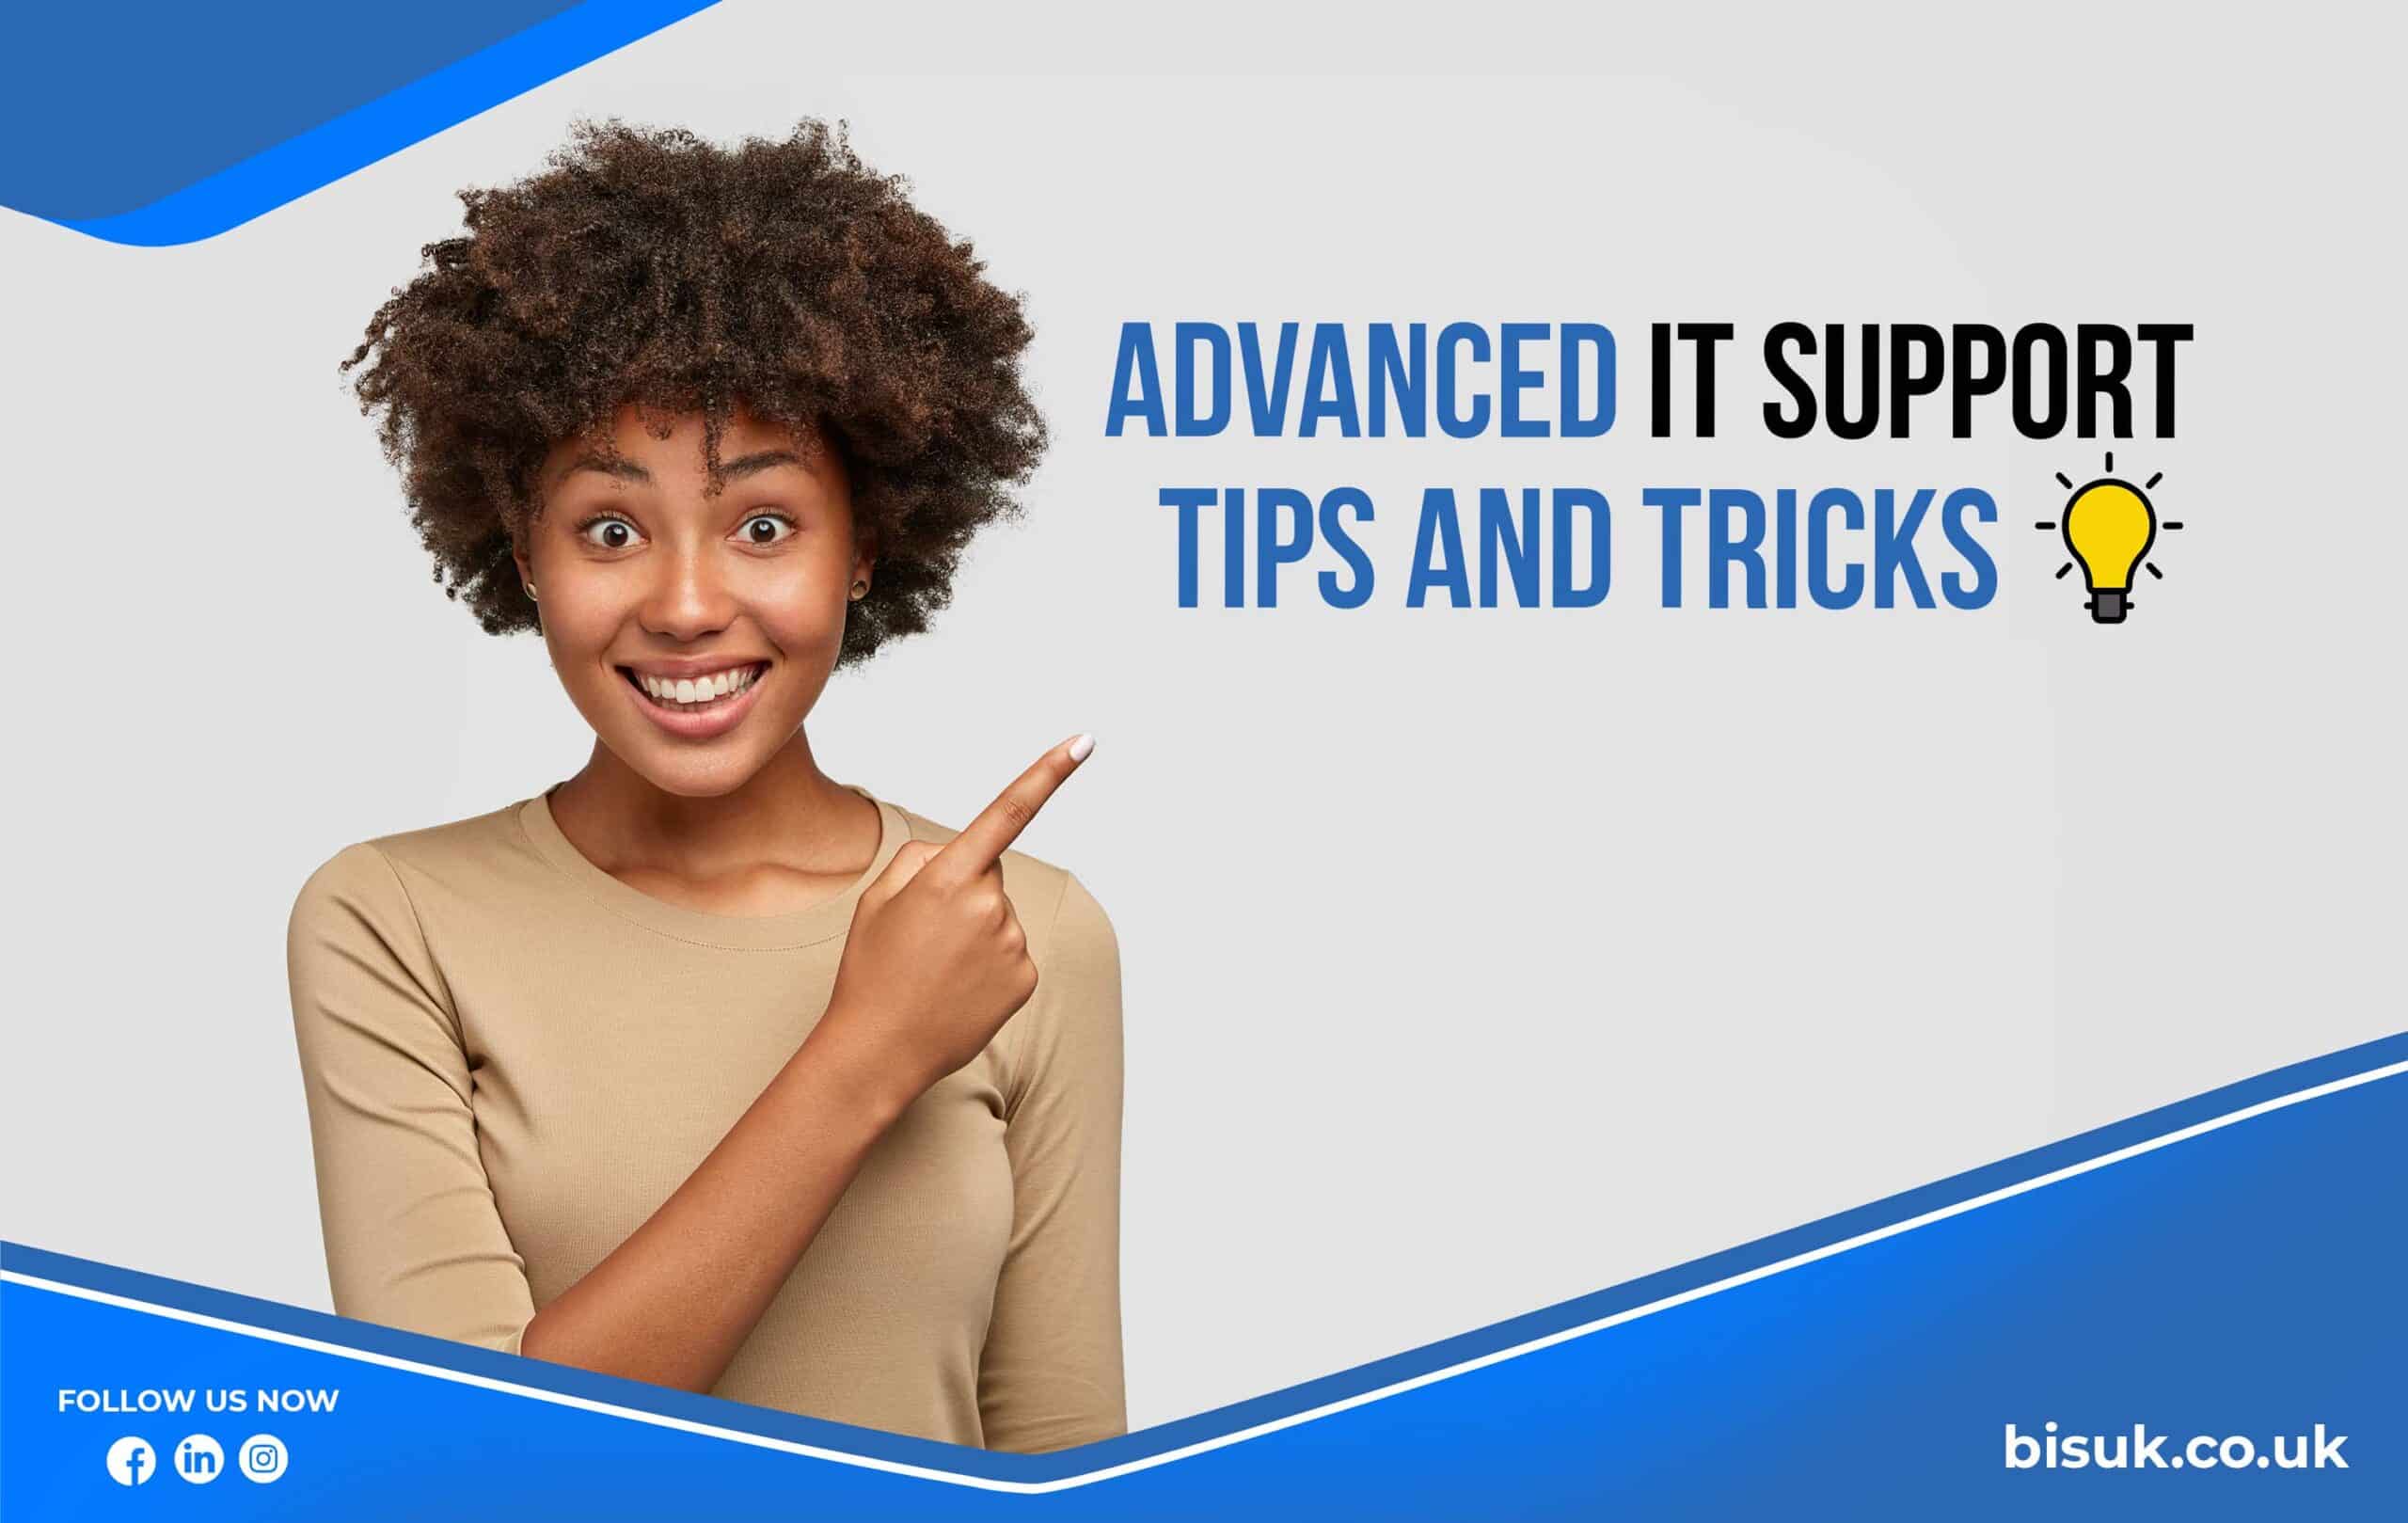 Advanced IT support tips and tricks